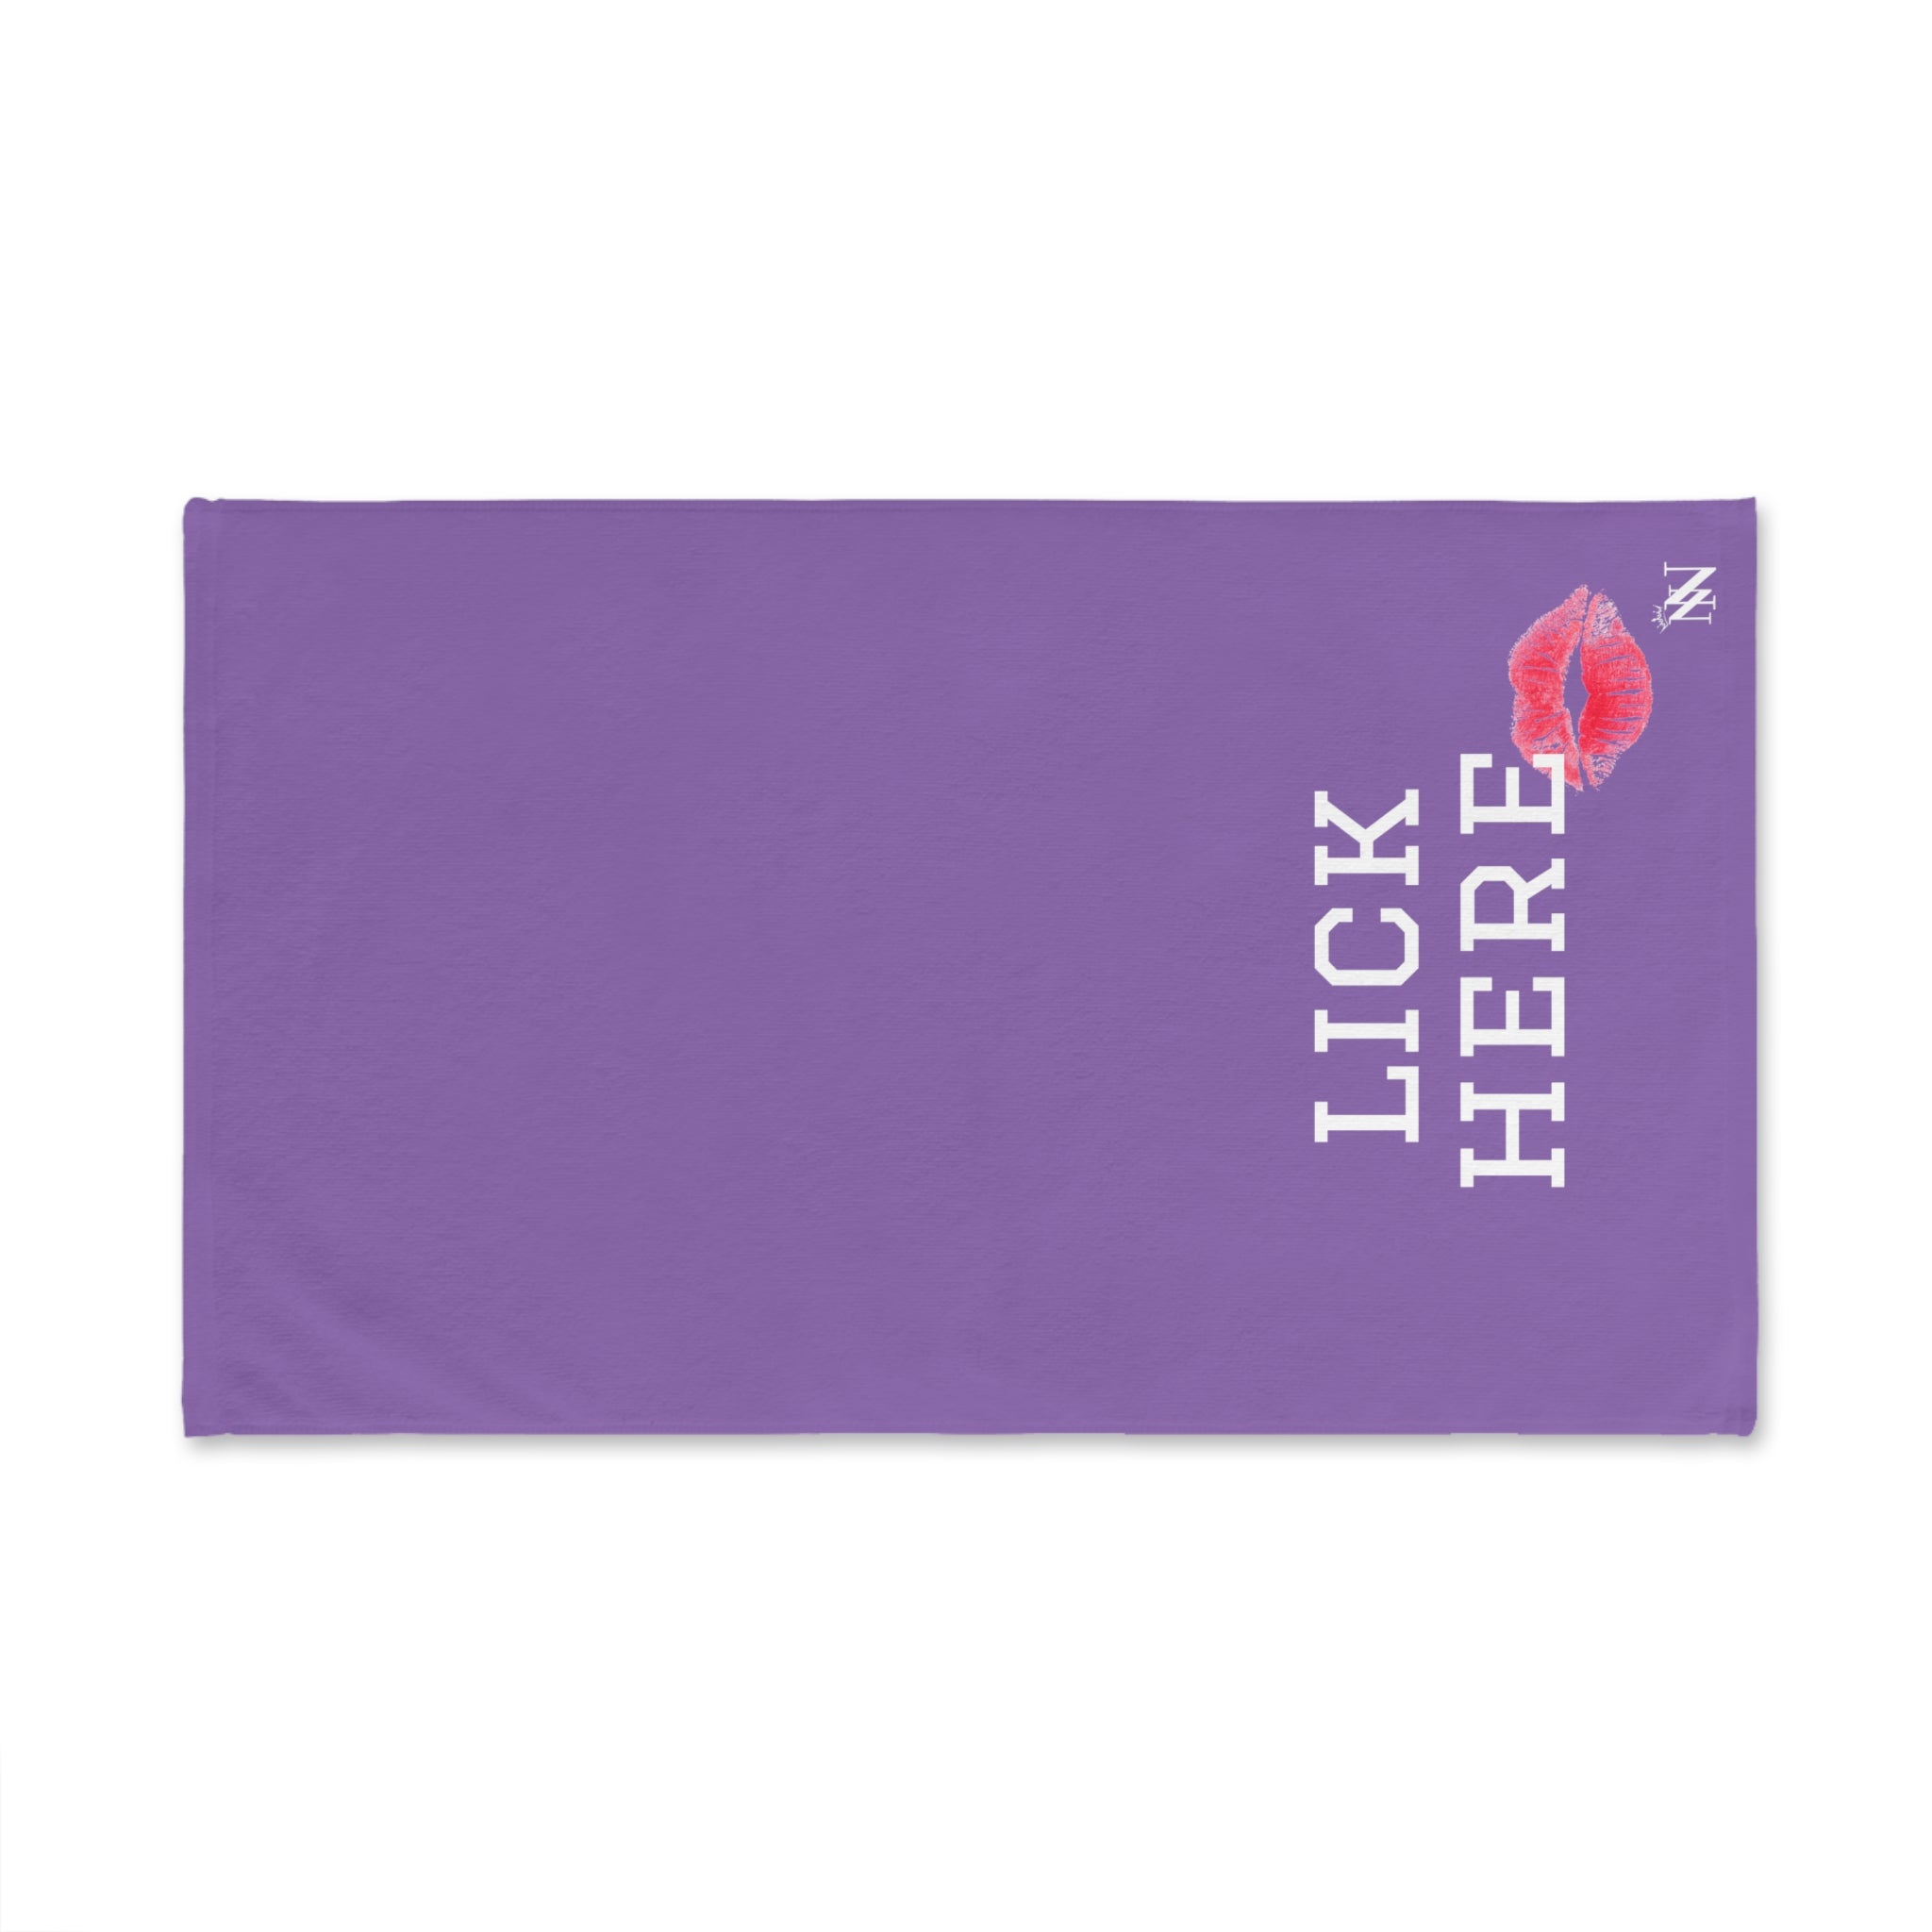 Lick Here Kissing Lavendar | Funny Gifts for Men - Gifts for Him - Birthday Gifts for Men, Him, Husband, Boyfriend, New Couple Gifts, Fathers & Valentines Day Gifts, Hand Towels NECTAR NAPKINS